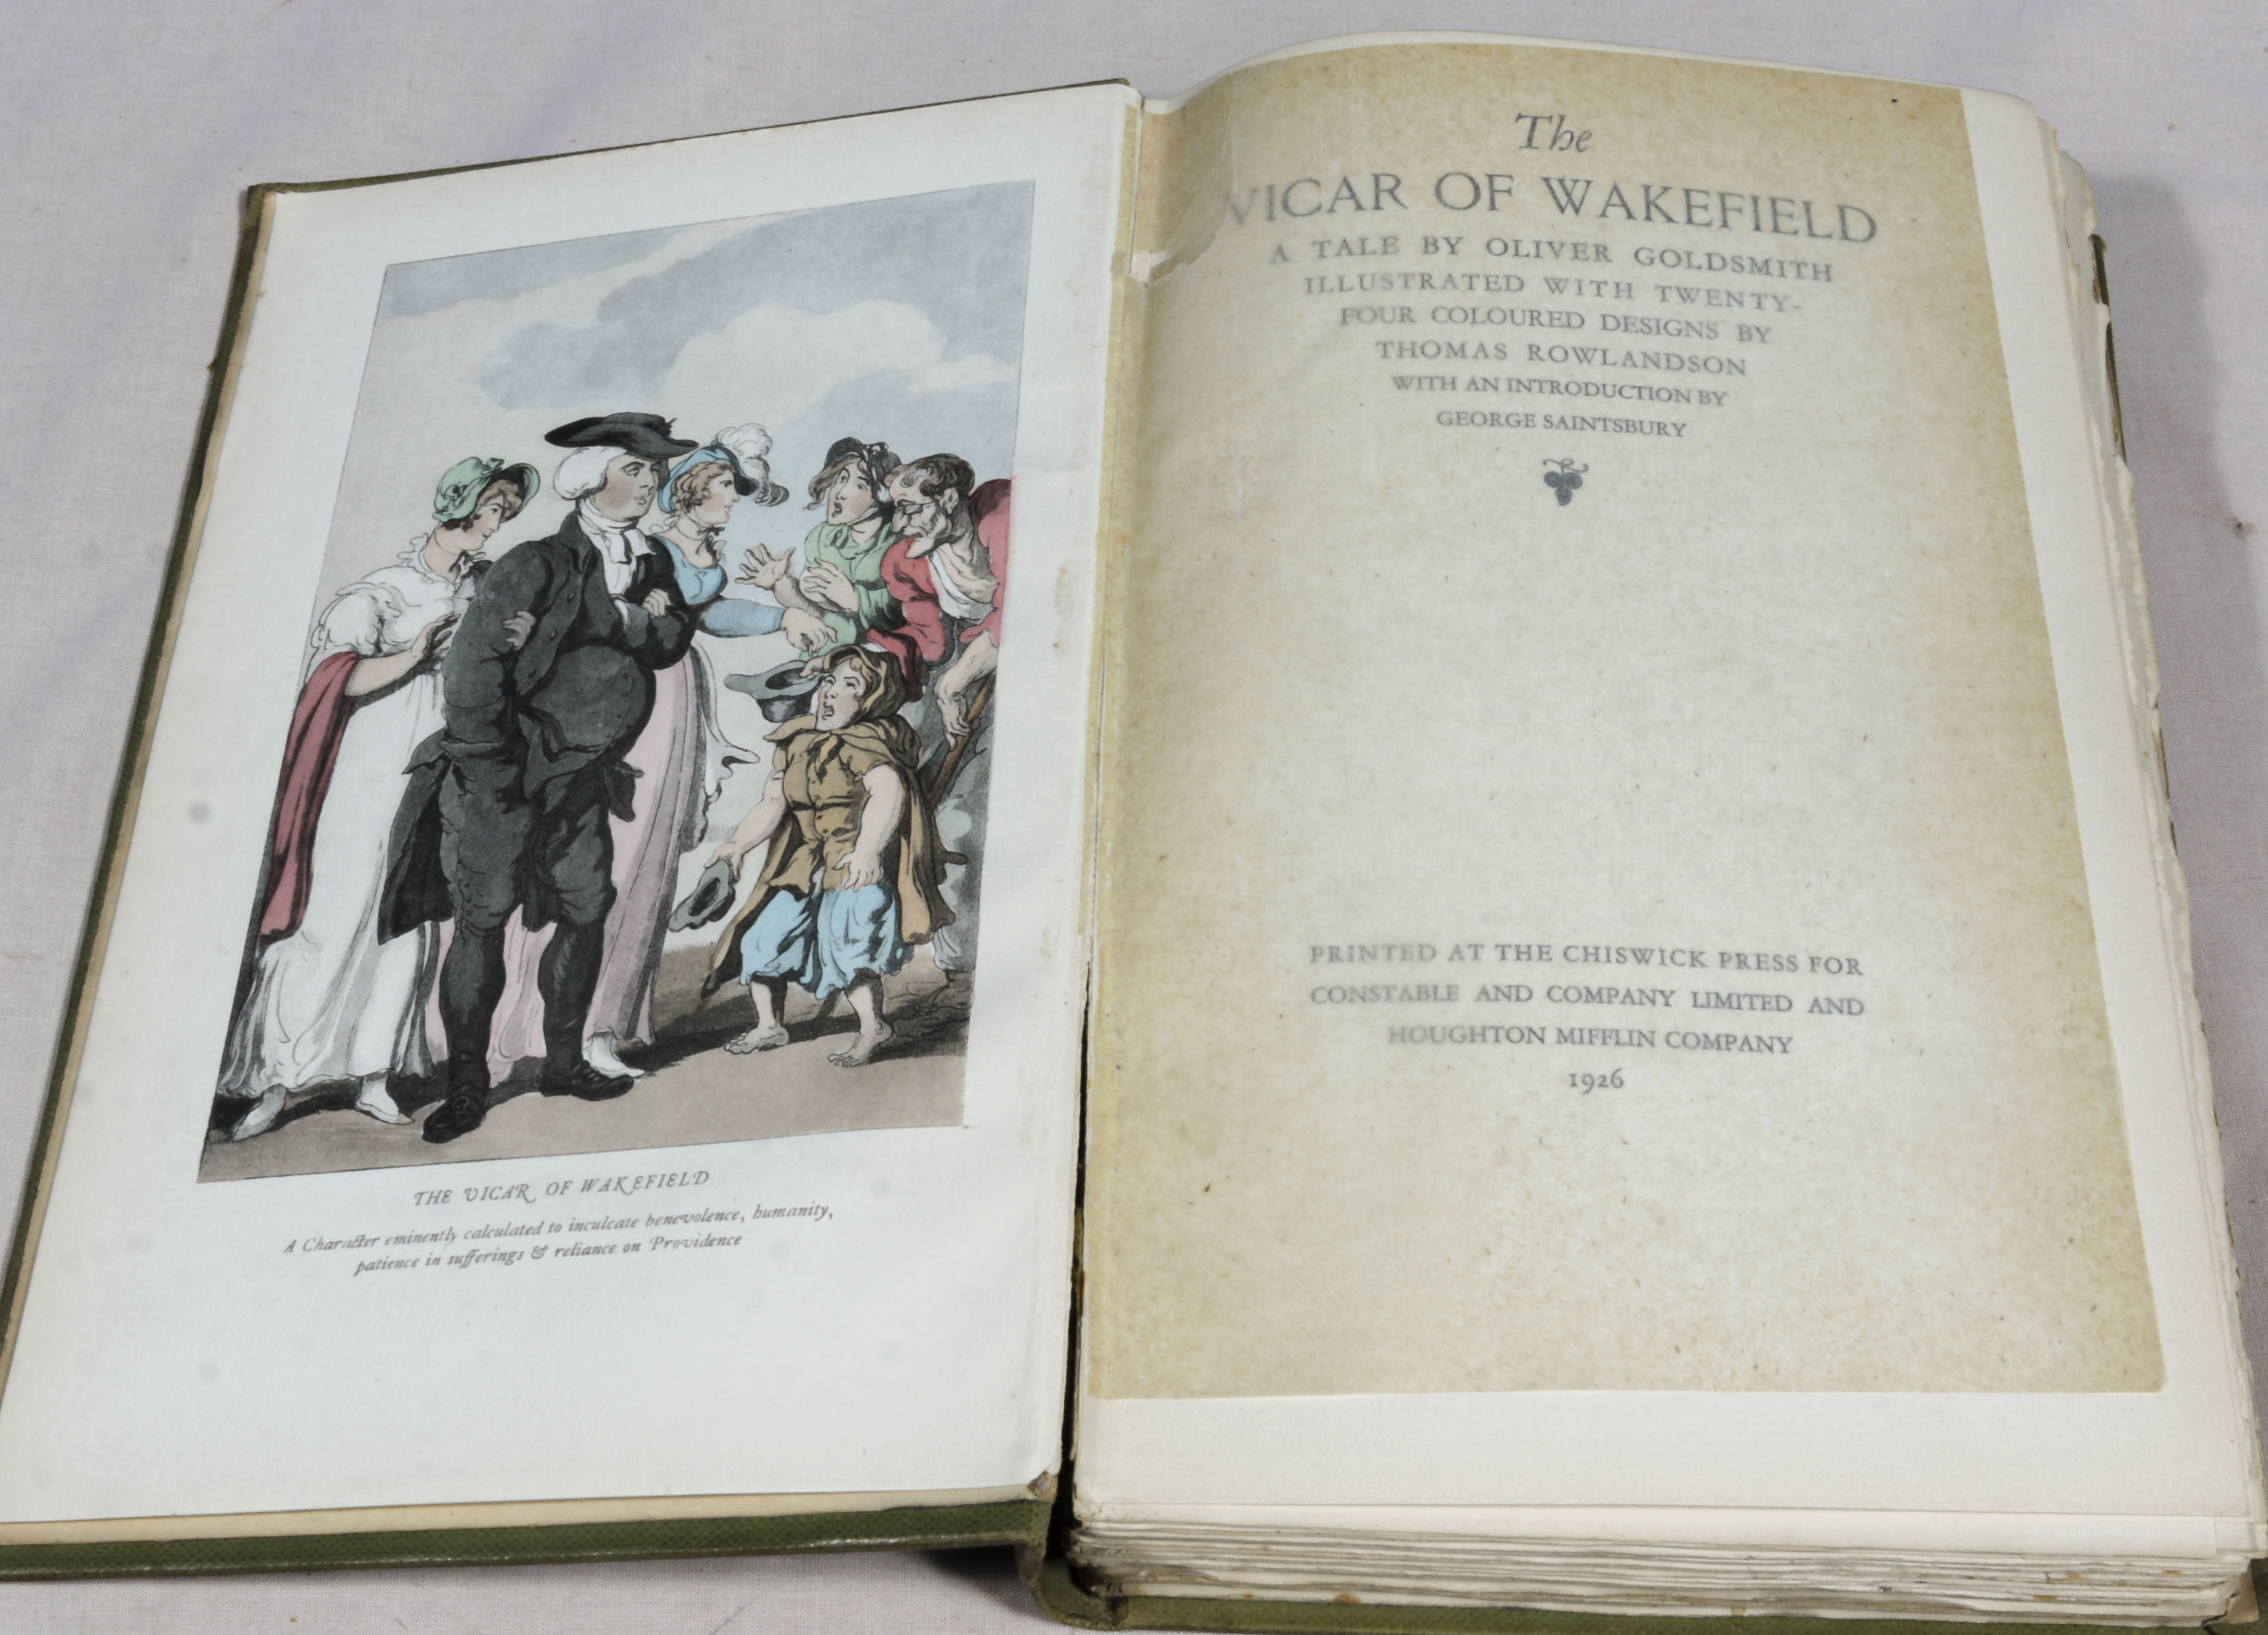 Thomas Rowlandson. The Vicar of Wakefield, a tale by Oliver goldsmith, illustrated with 24 - Image 2 of 7